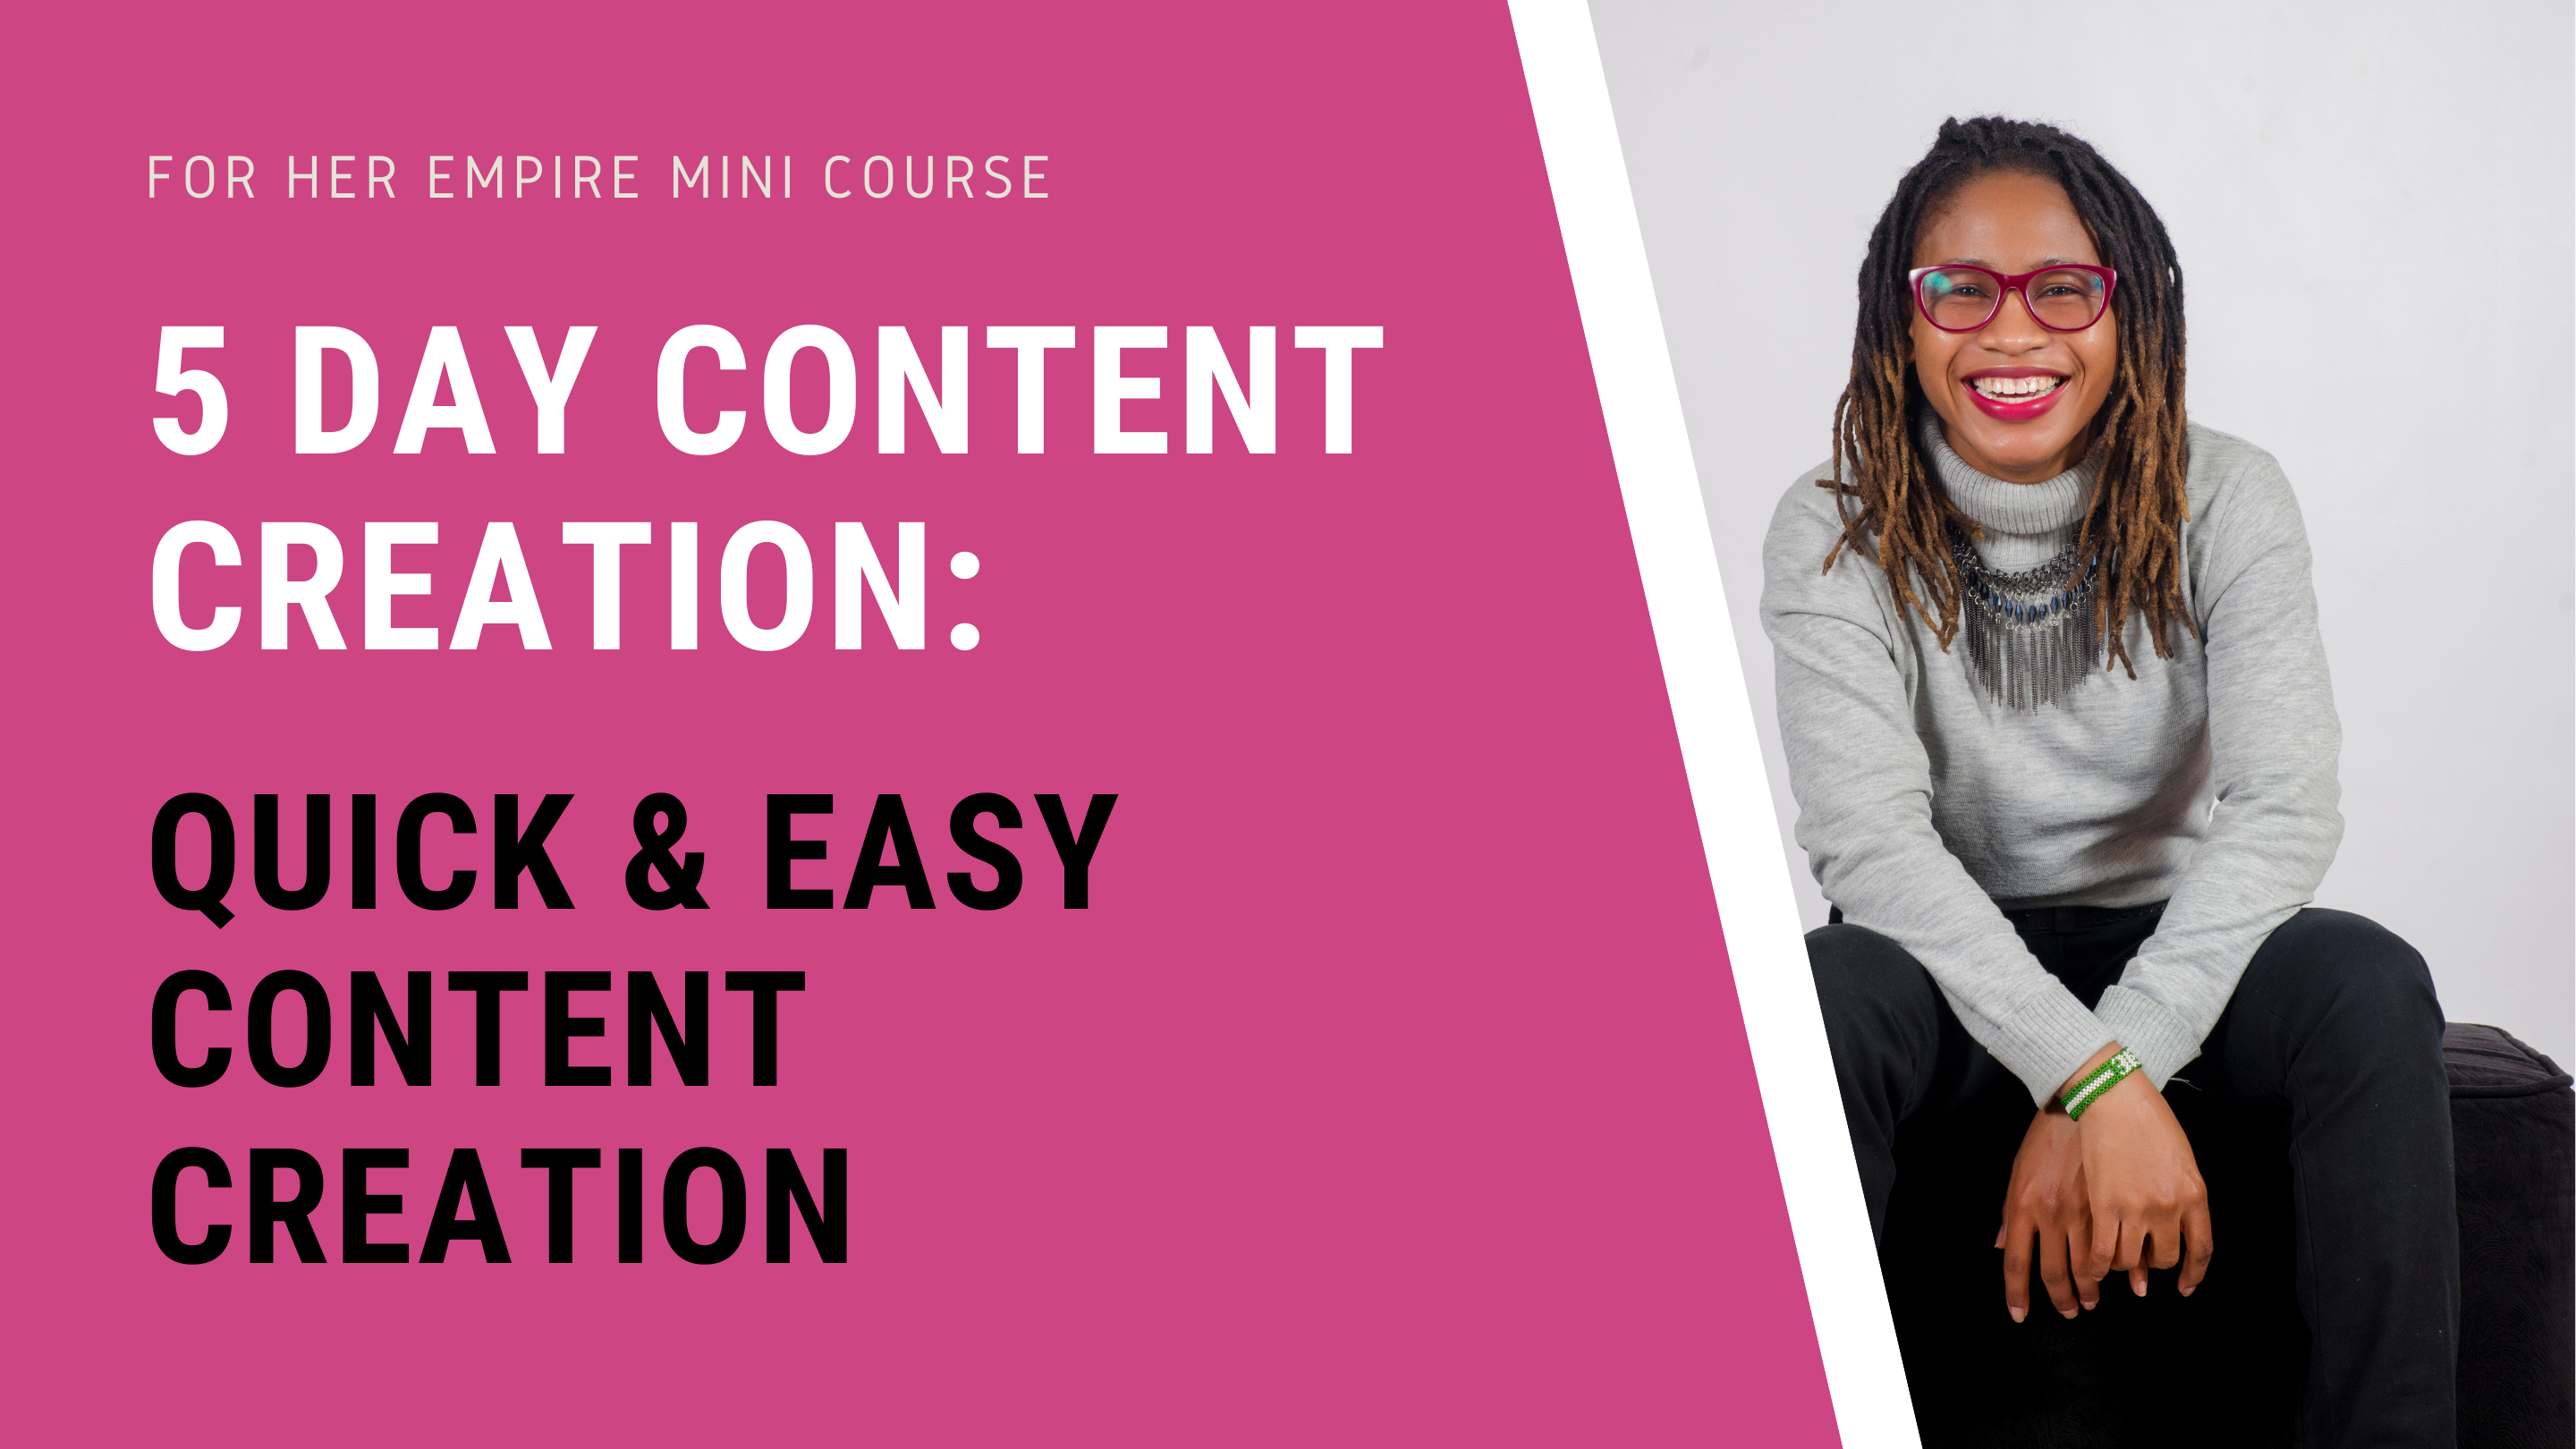 Simple steps for content creation